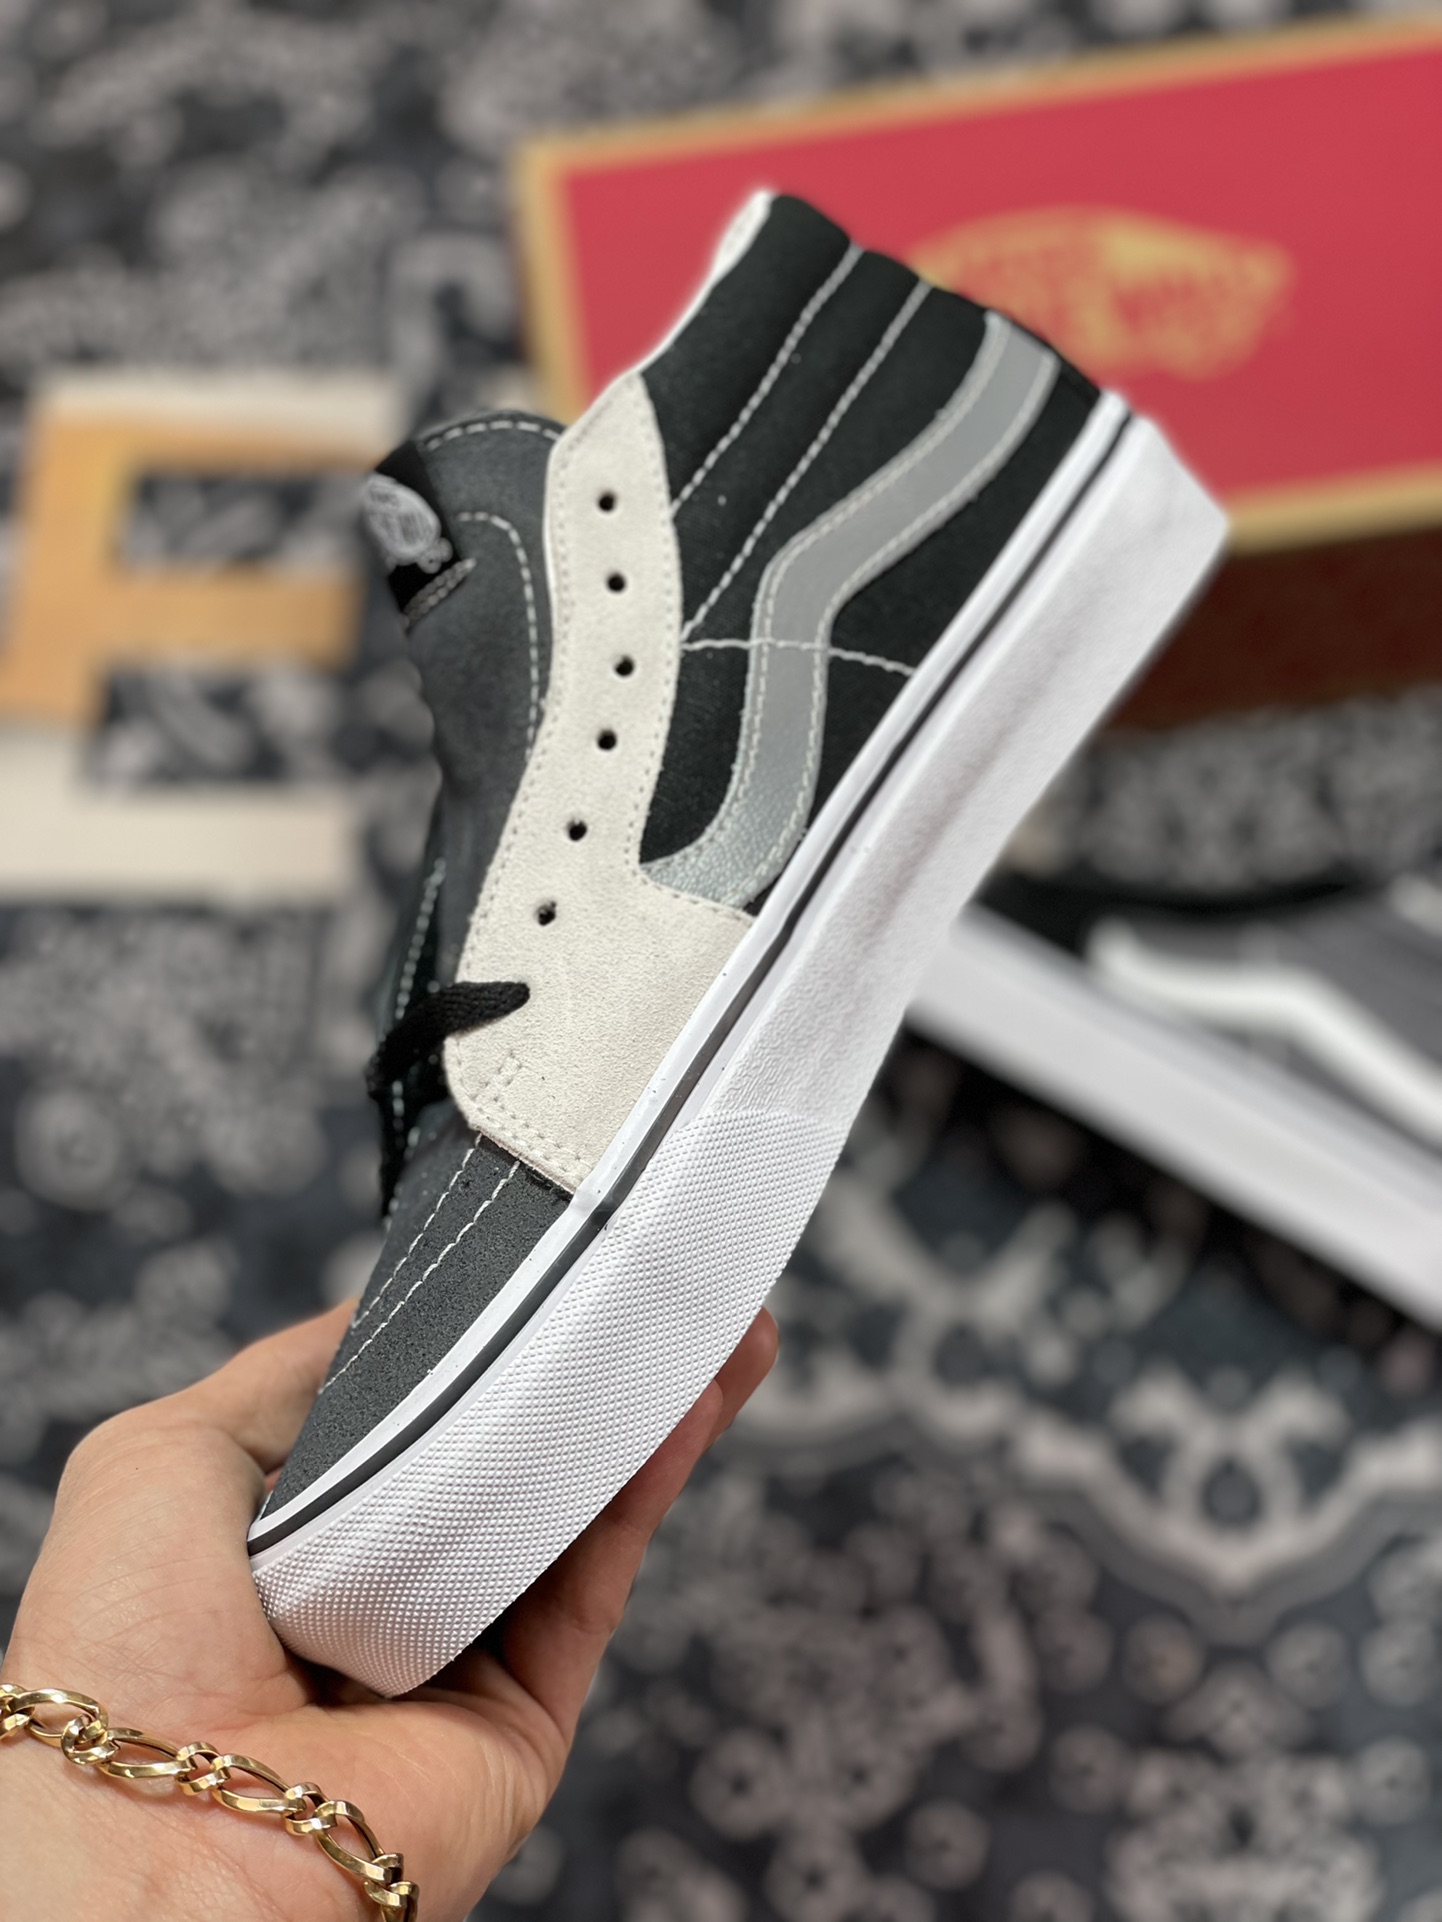 Vans Sk8 Mid Reissue black and gray mid-top retro casual canvas skate shoes